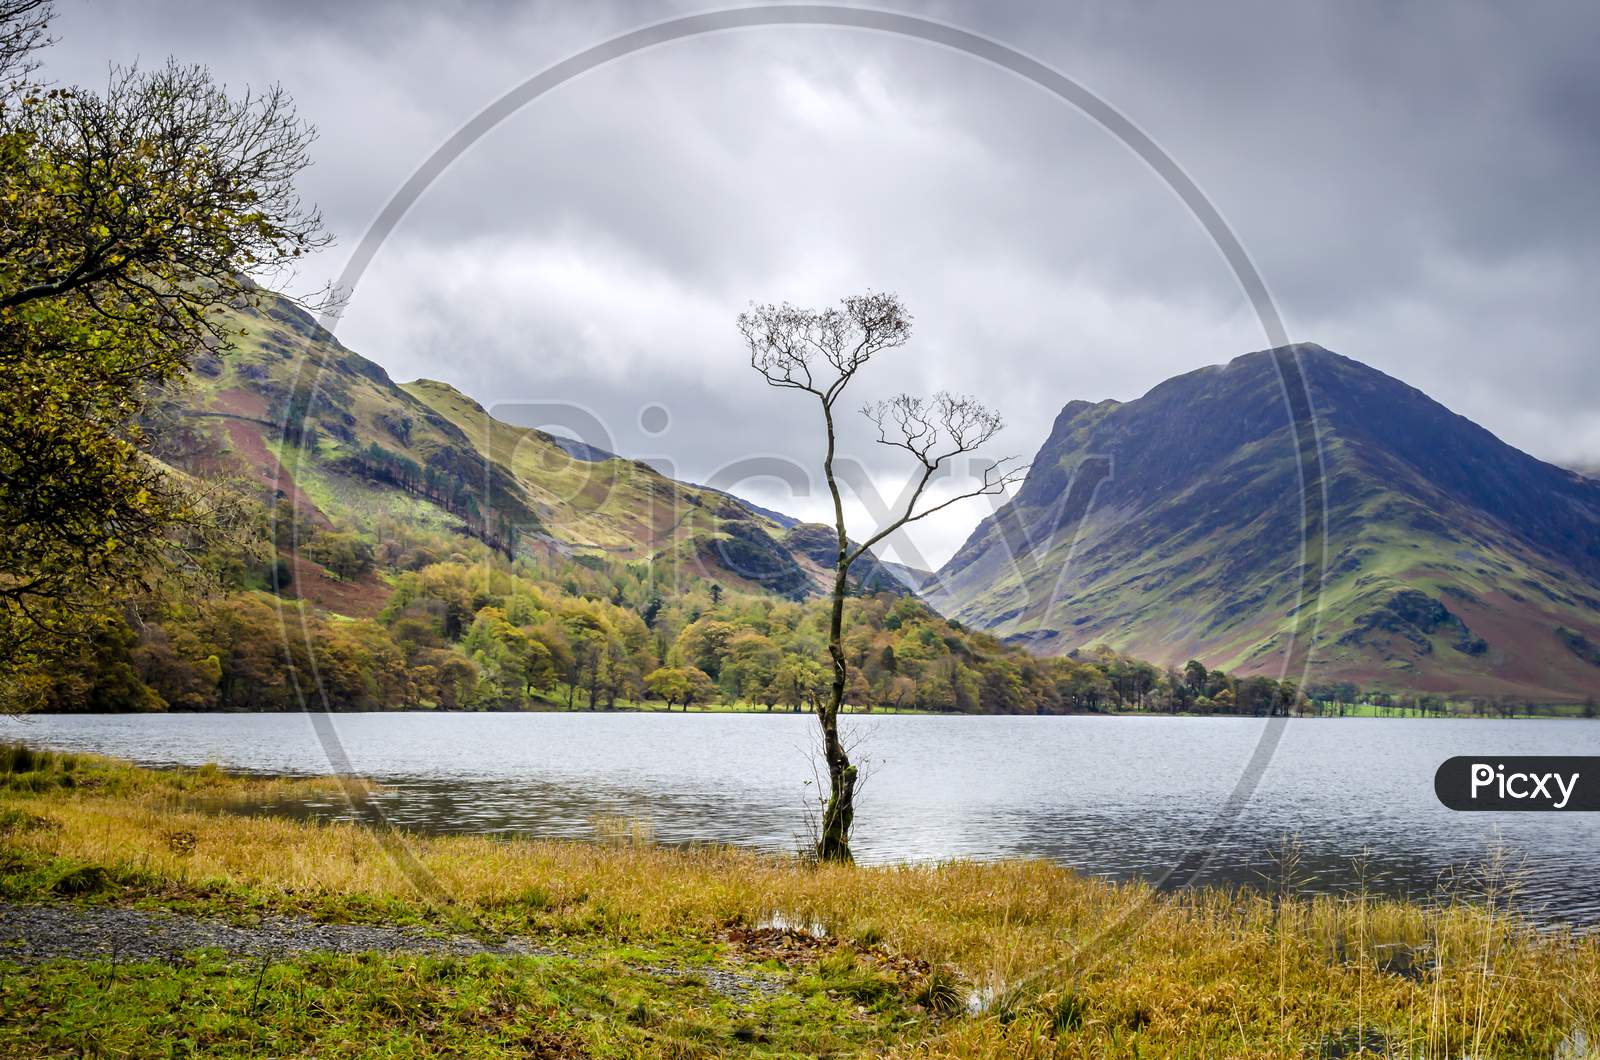 Known as the Lone tree located at the Northern end of Buttermere lake